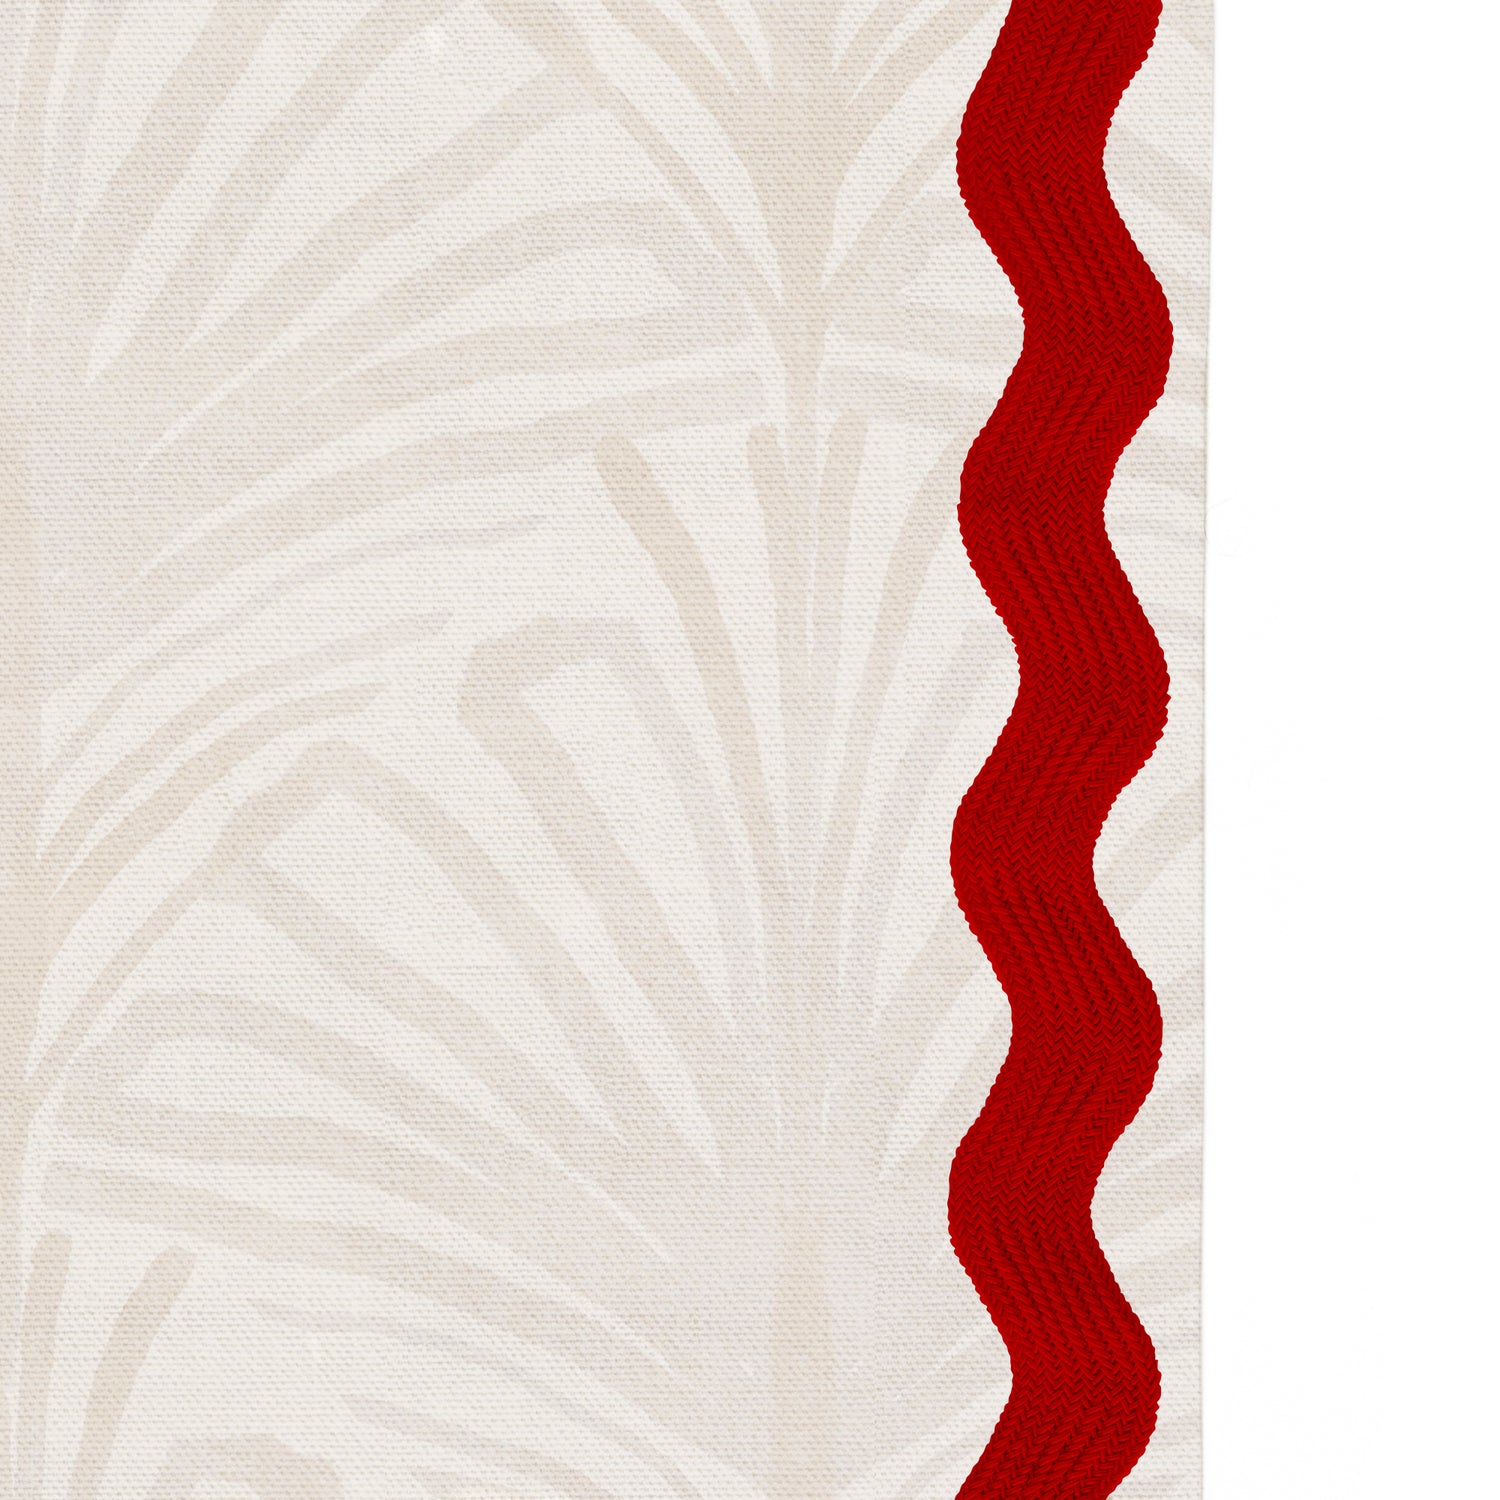 Upclose picture of Suzy Sand custom Beige Palmcurtain with cherry rick rack trim